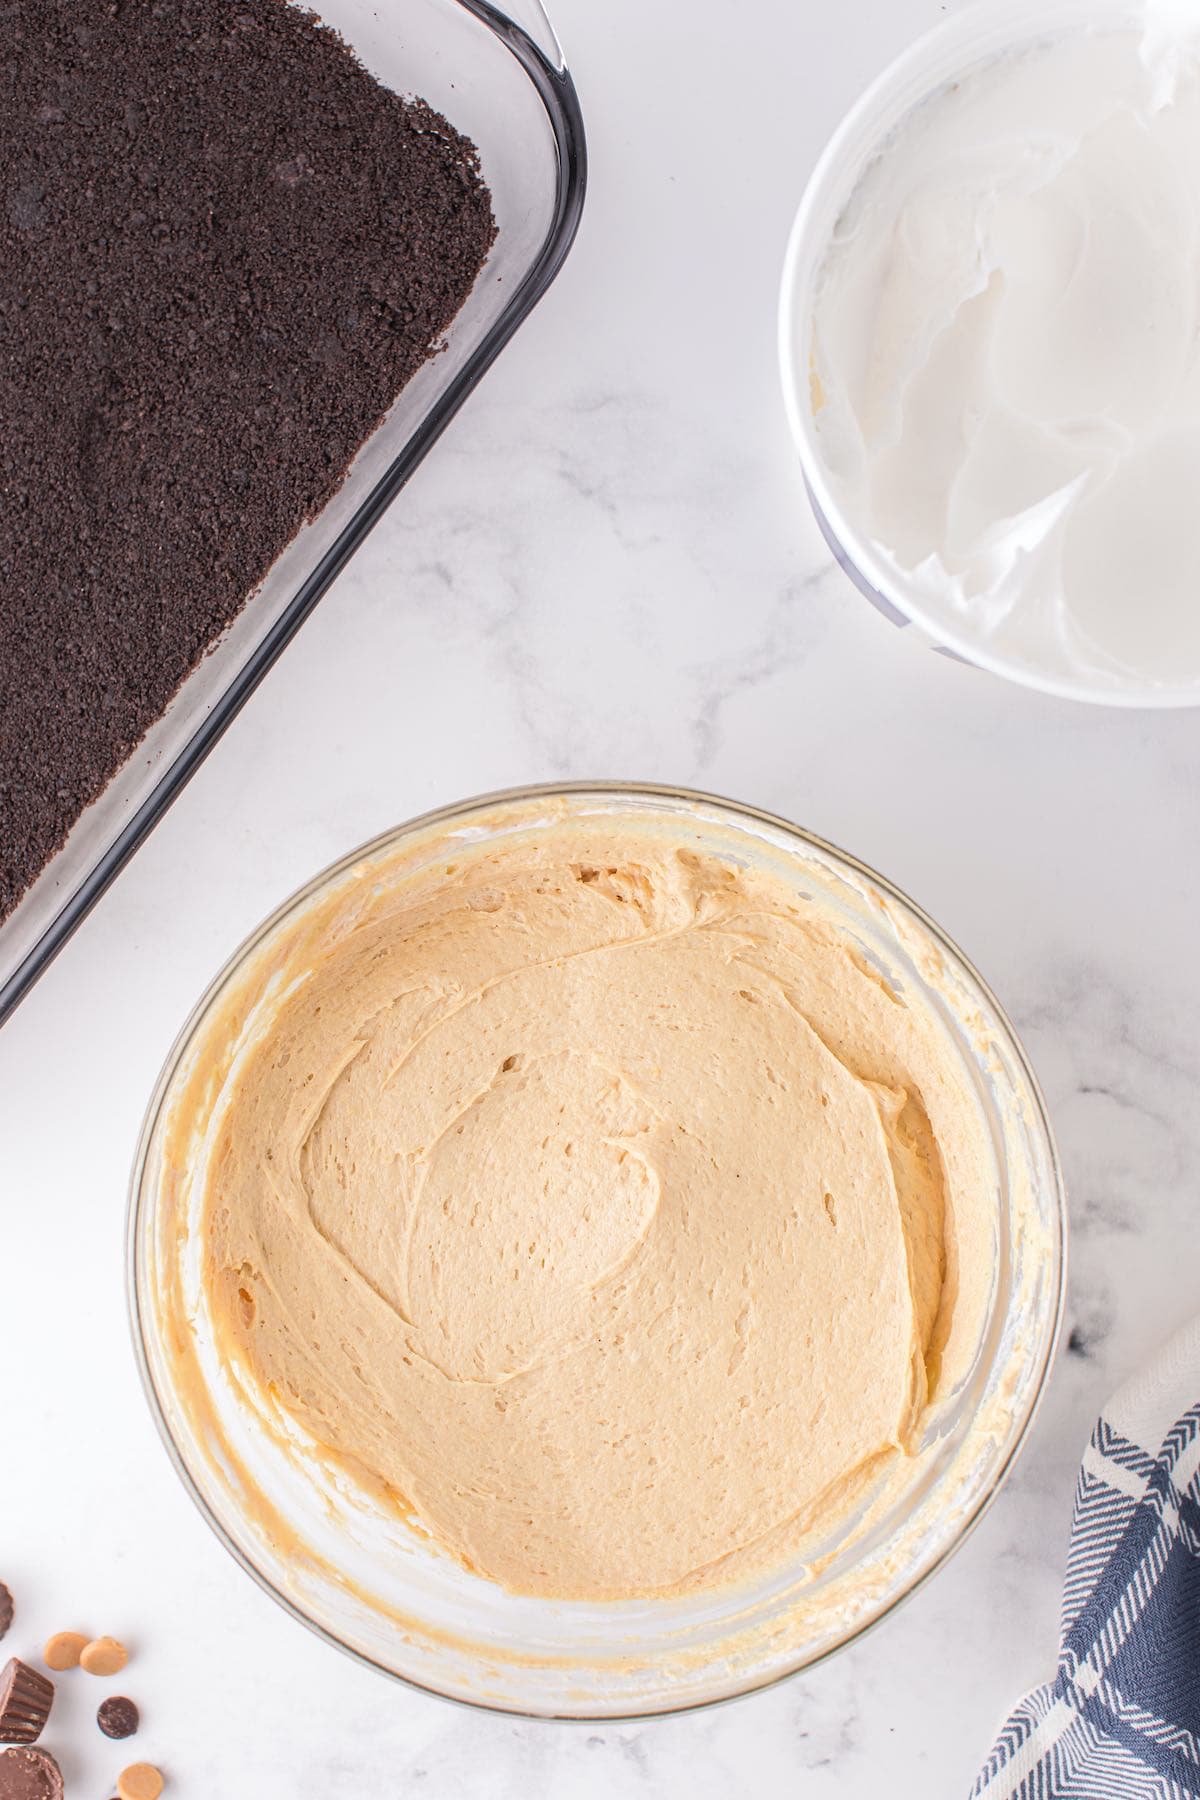 cream cheese and peanut butter mixed in a bowl